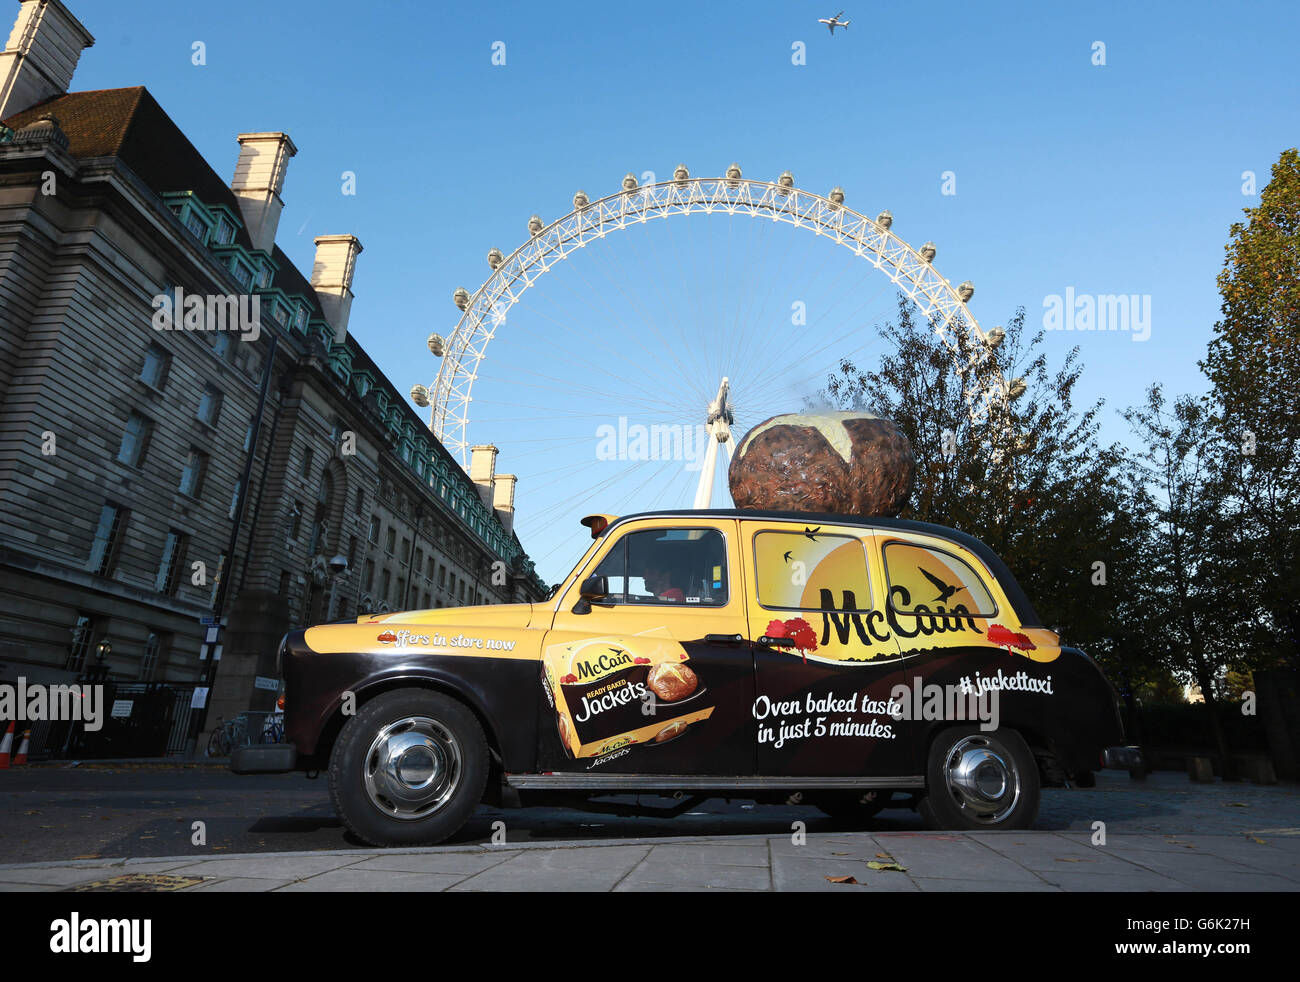 The McCain Ready Baked Jacket Taxi, a specially modified taxi with built in potato cooking facilities, parked in front of the London Eye in London. Stock Photo